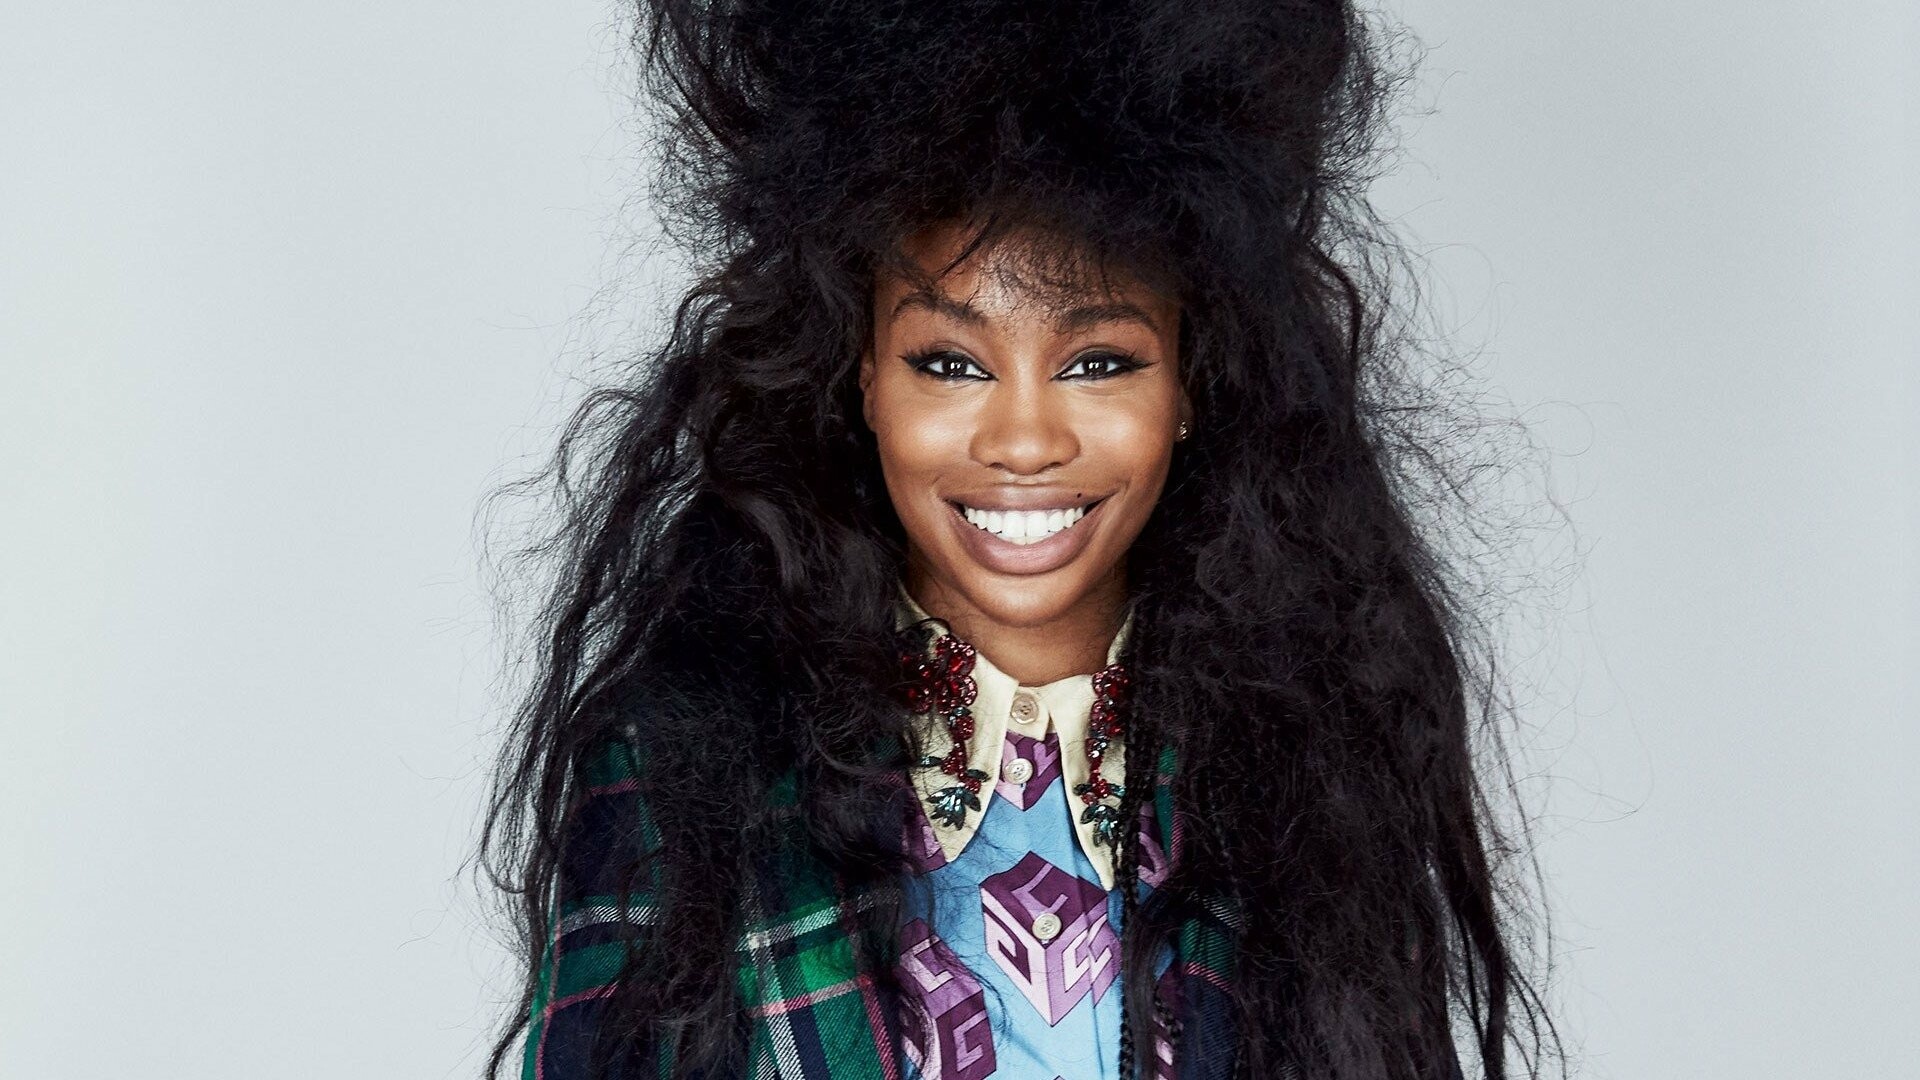 SZA: An American singer-songwriter whose real name is Solana Imani Rowe. 1920x1080 Full HD Wallpaper.